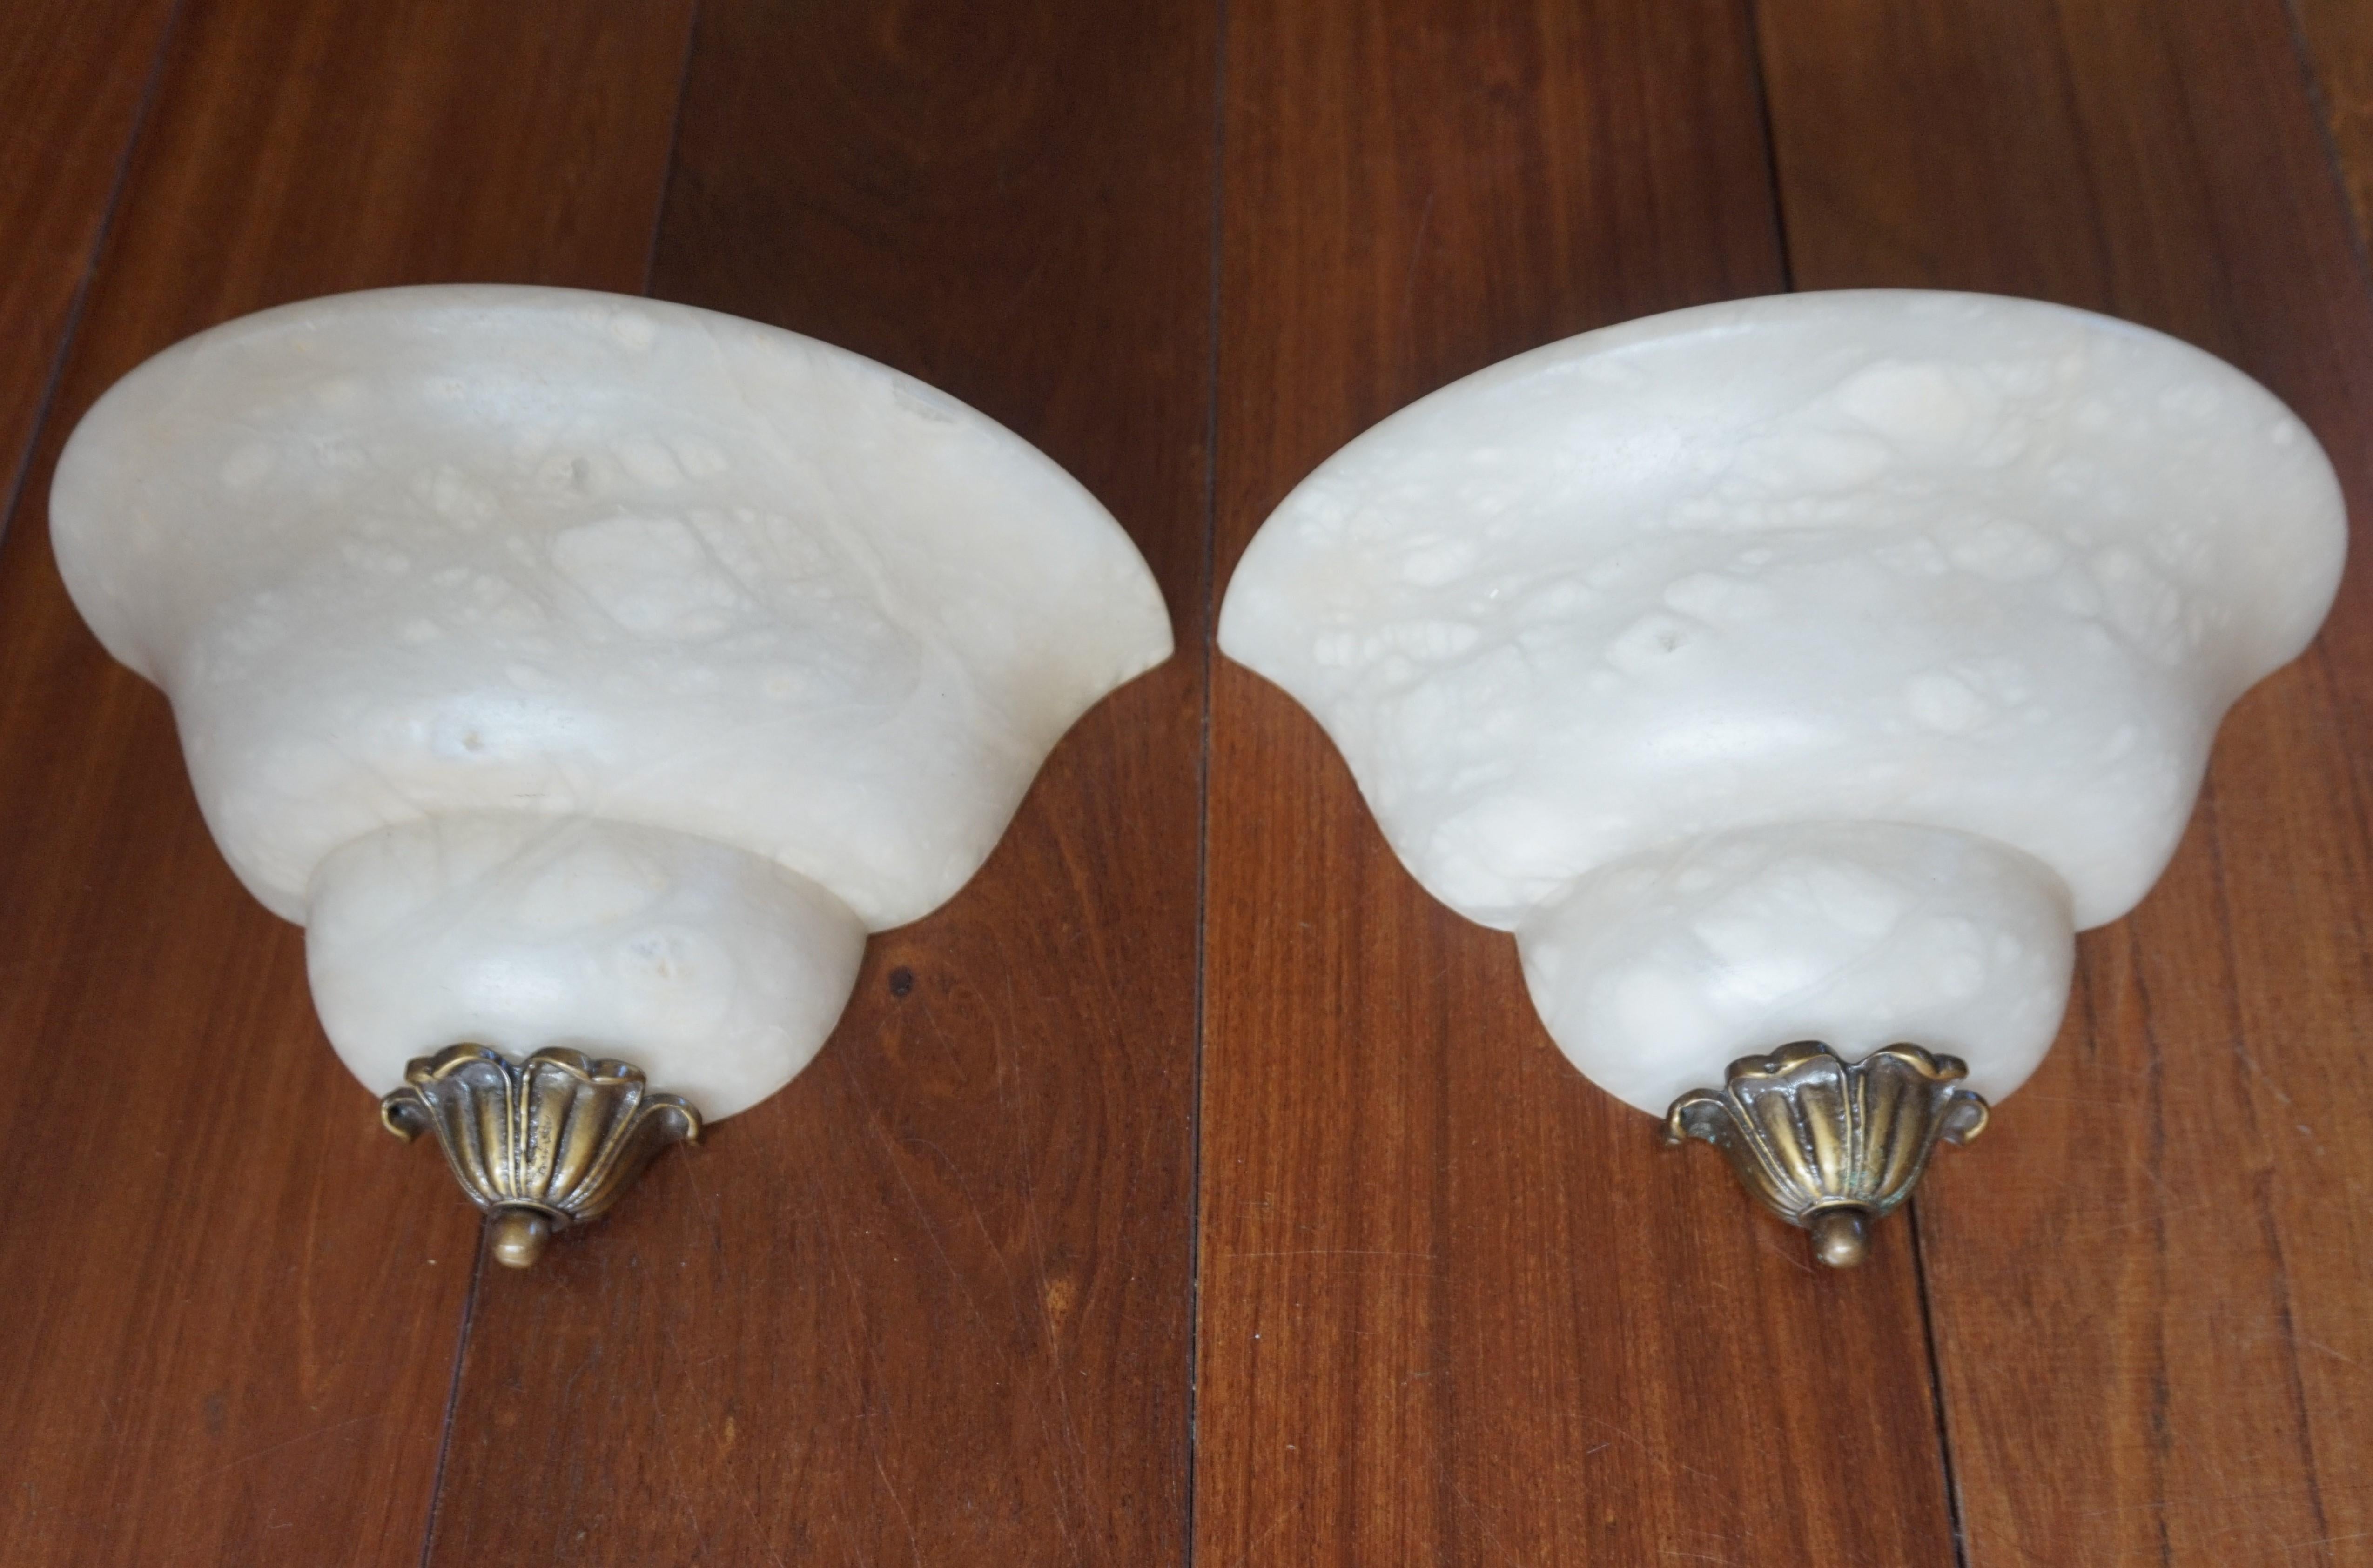 Excellent condition sconces with a marvellous 'cloud pattern' in the stunning alabaster shades.

This French pair of alabaster sconces is beautiful in shape and practical in size. Hand-crafted with a bronze bud at the bottom, these stylized Art Deco